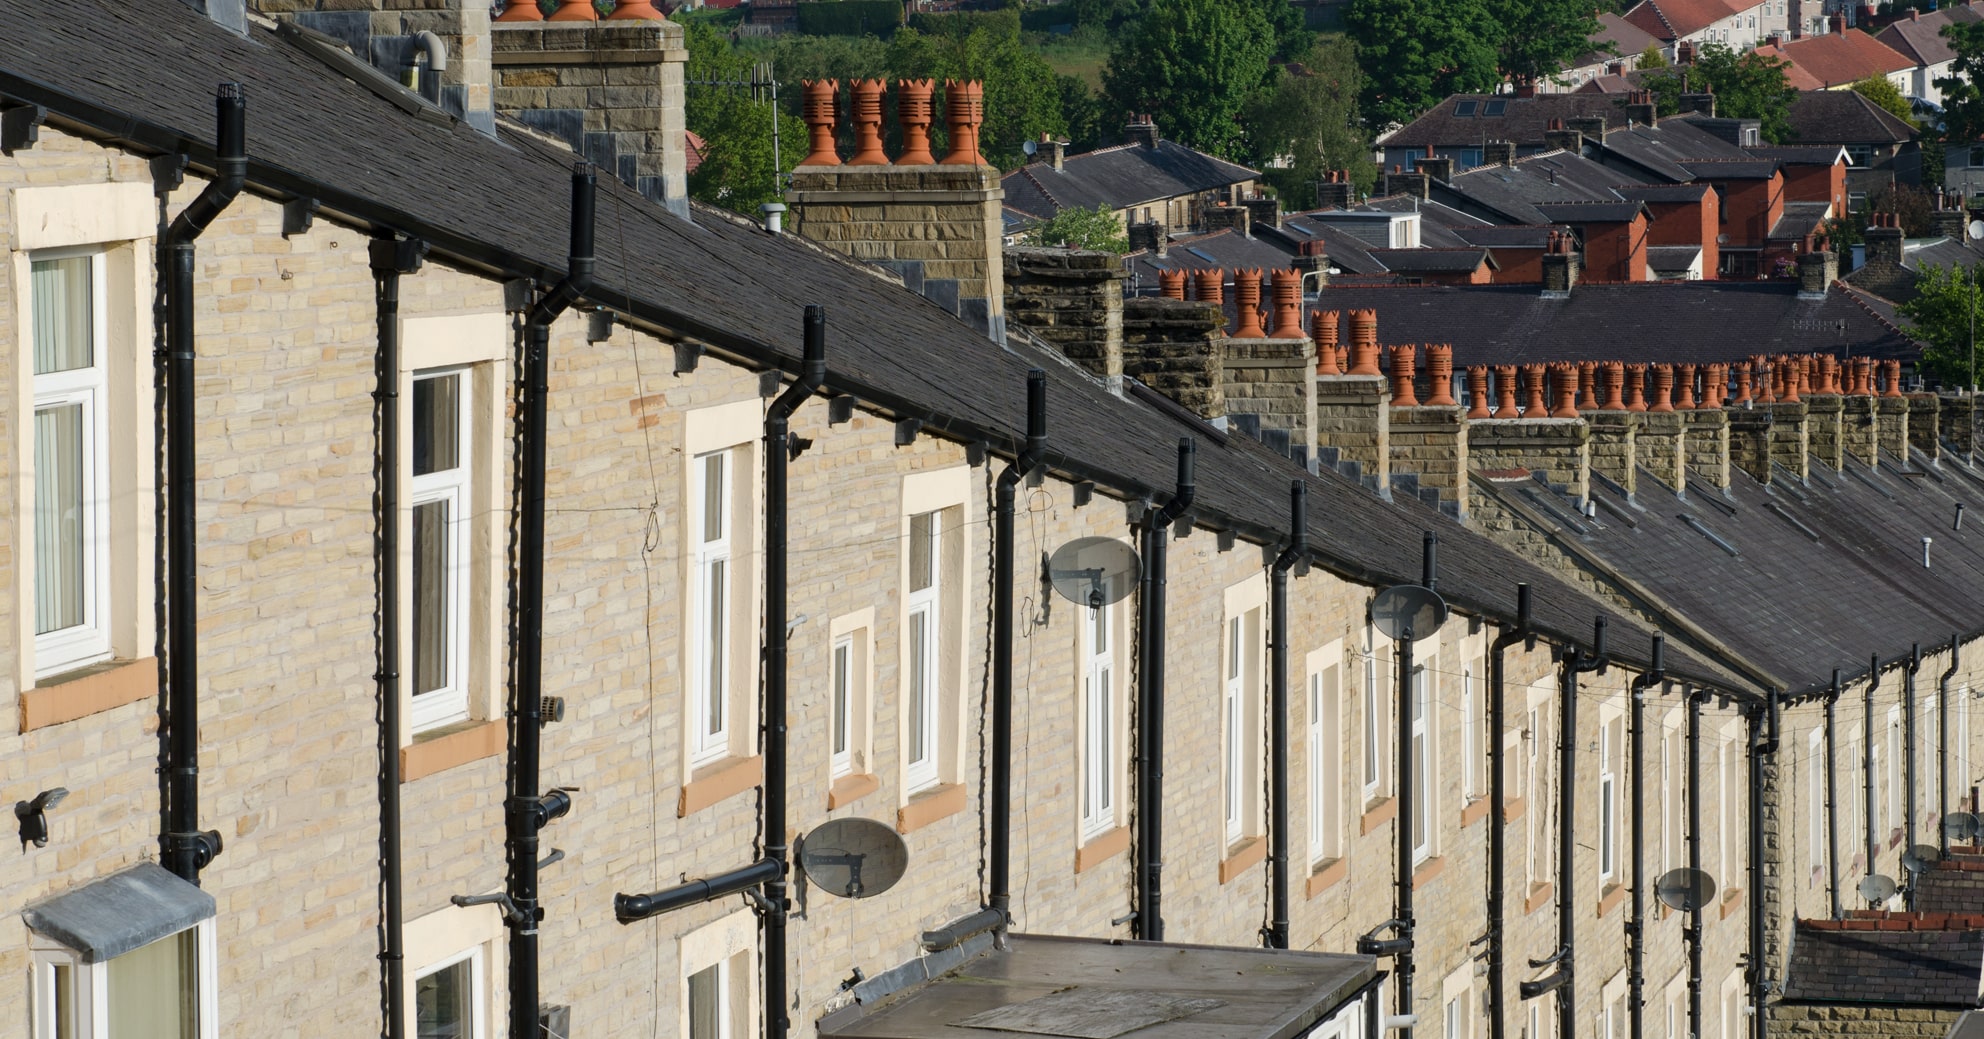 How good are buy to let profits in 2019?